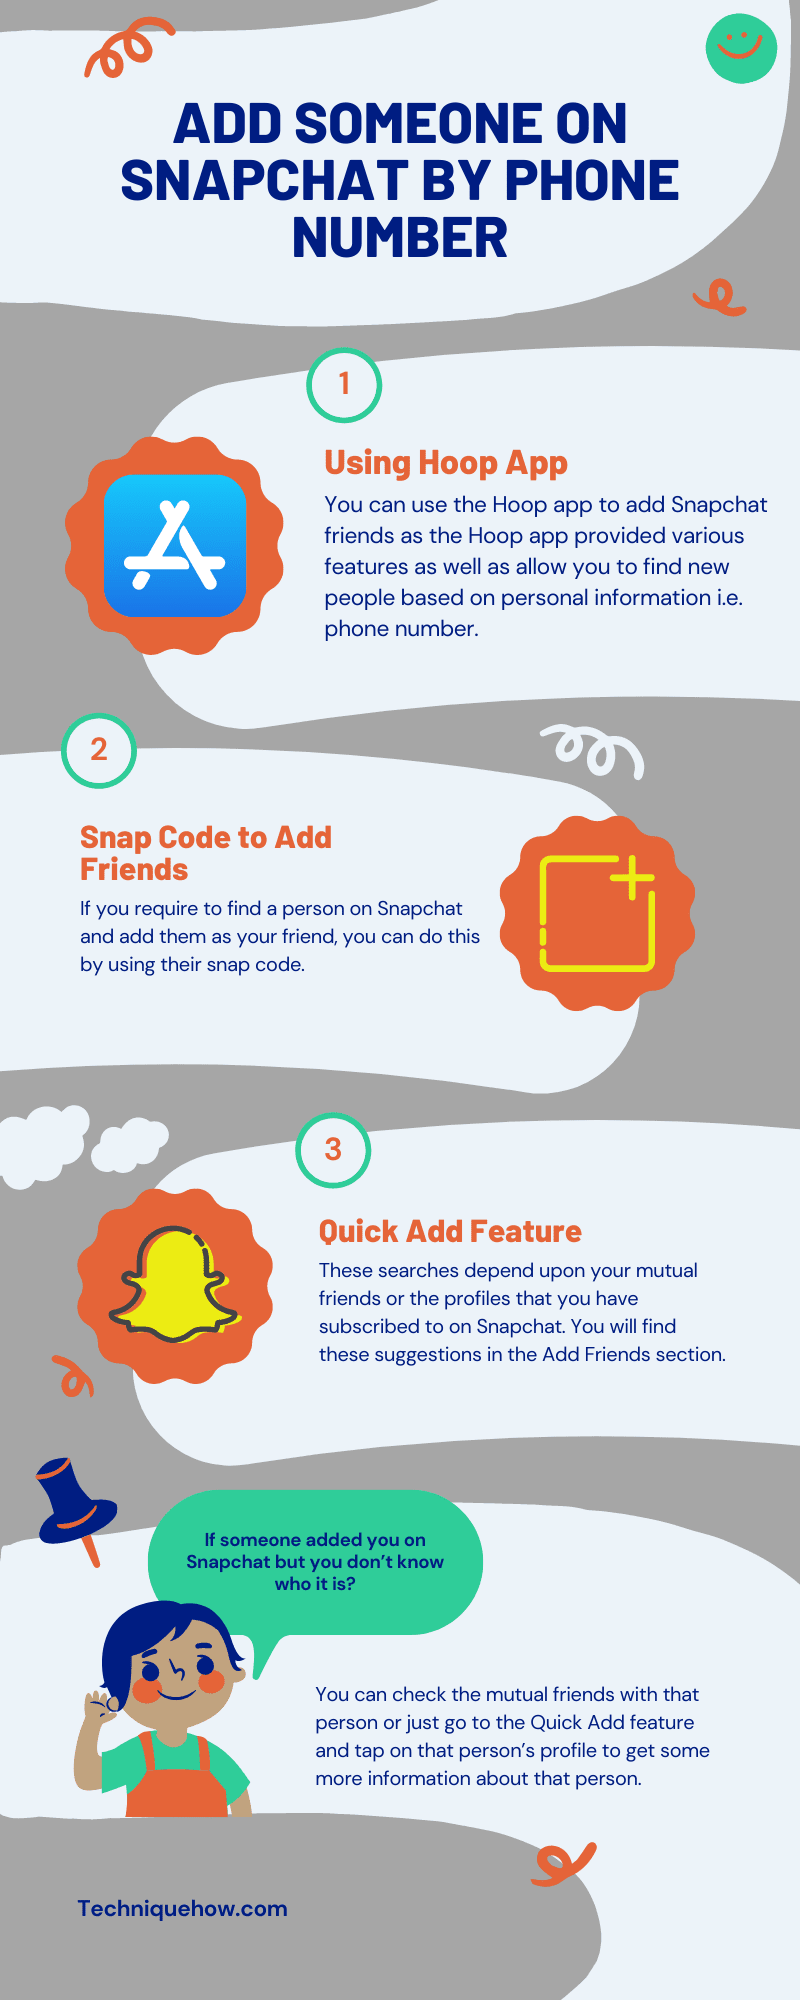 infographic_Add Someone on Snapchat by Phone Number